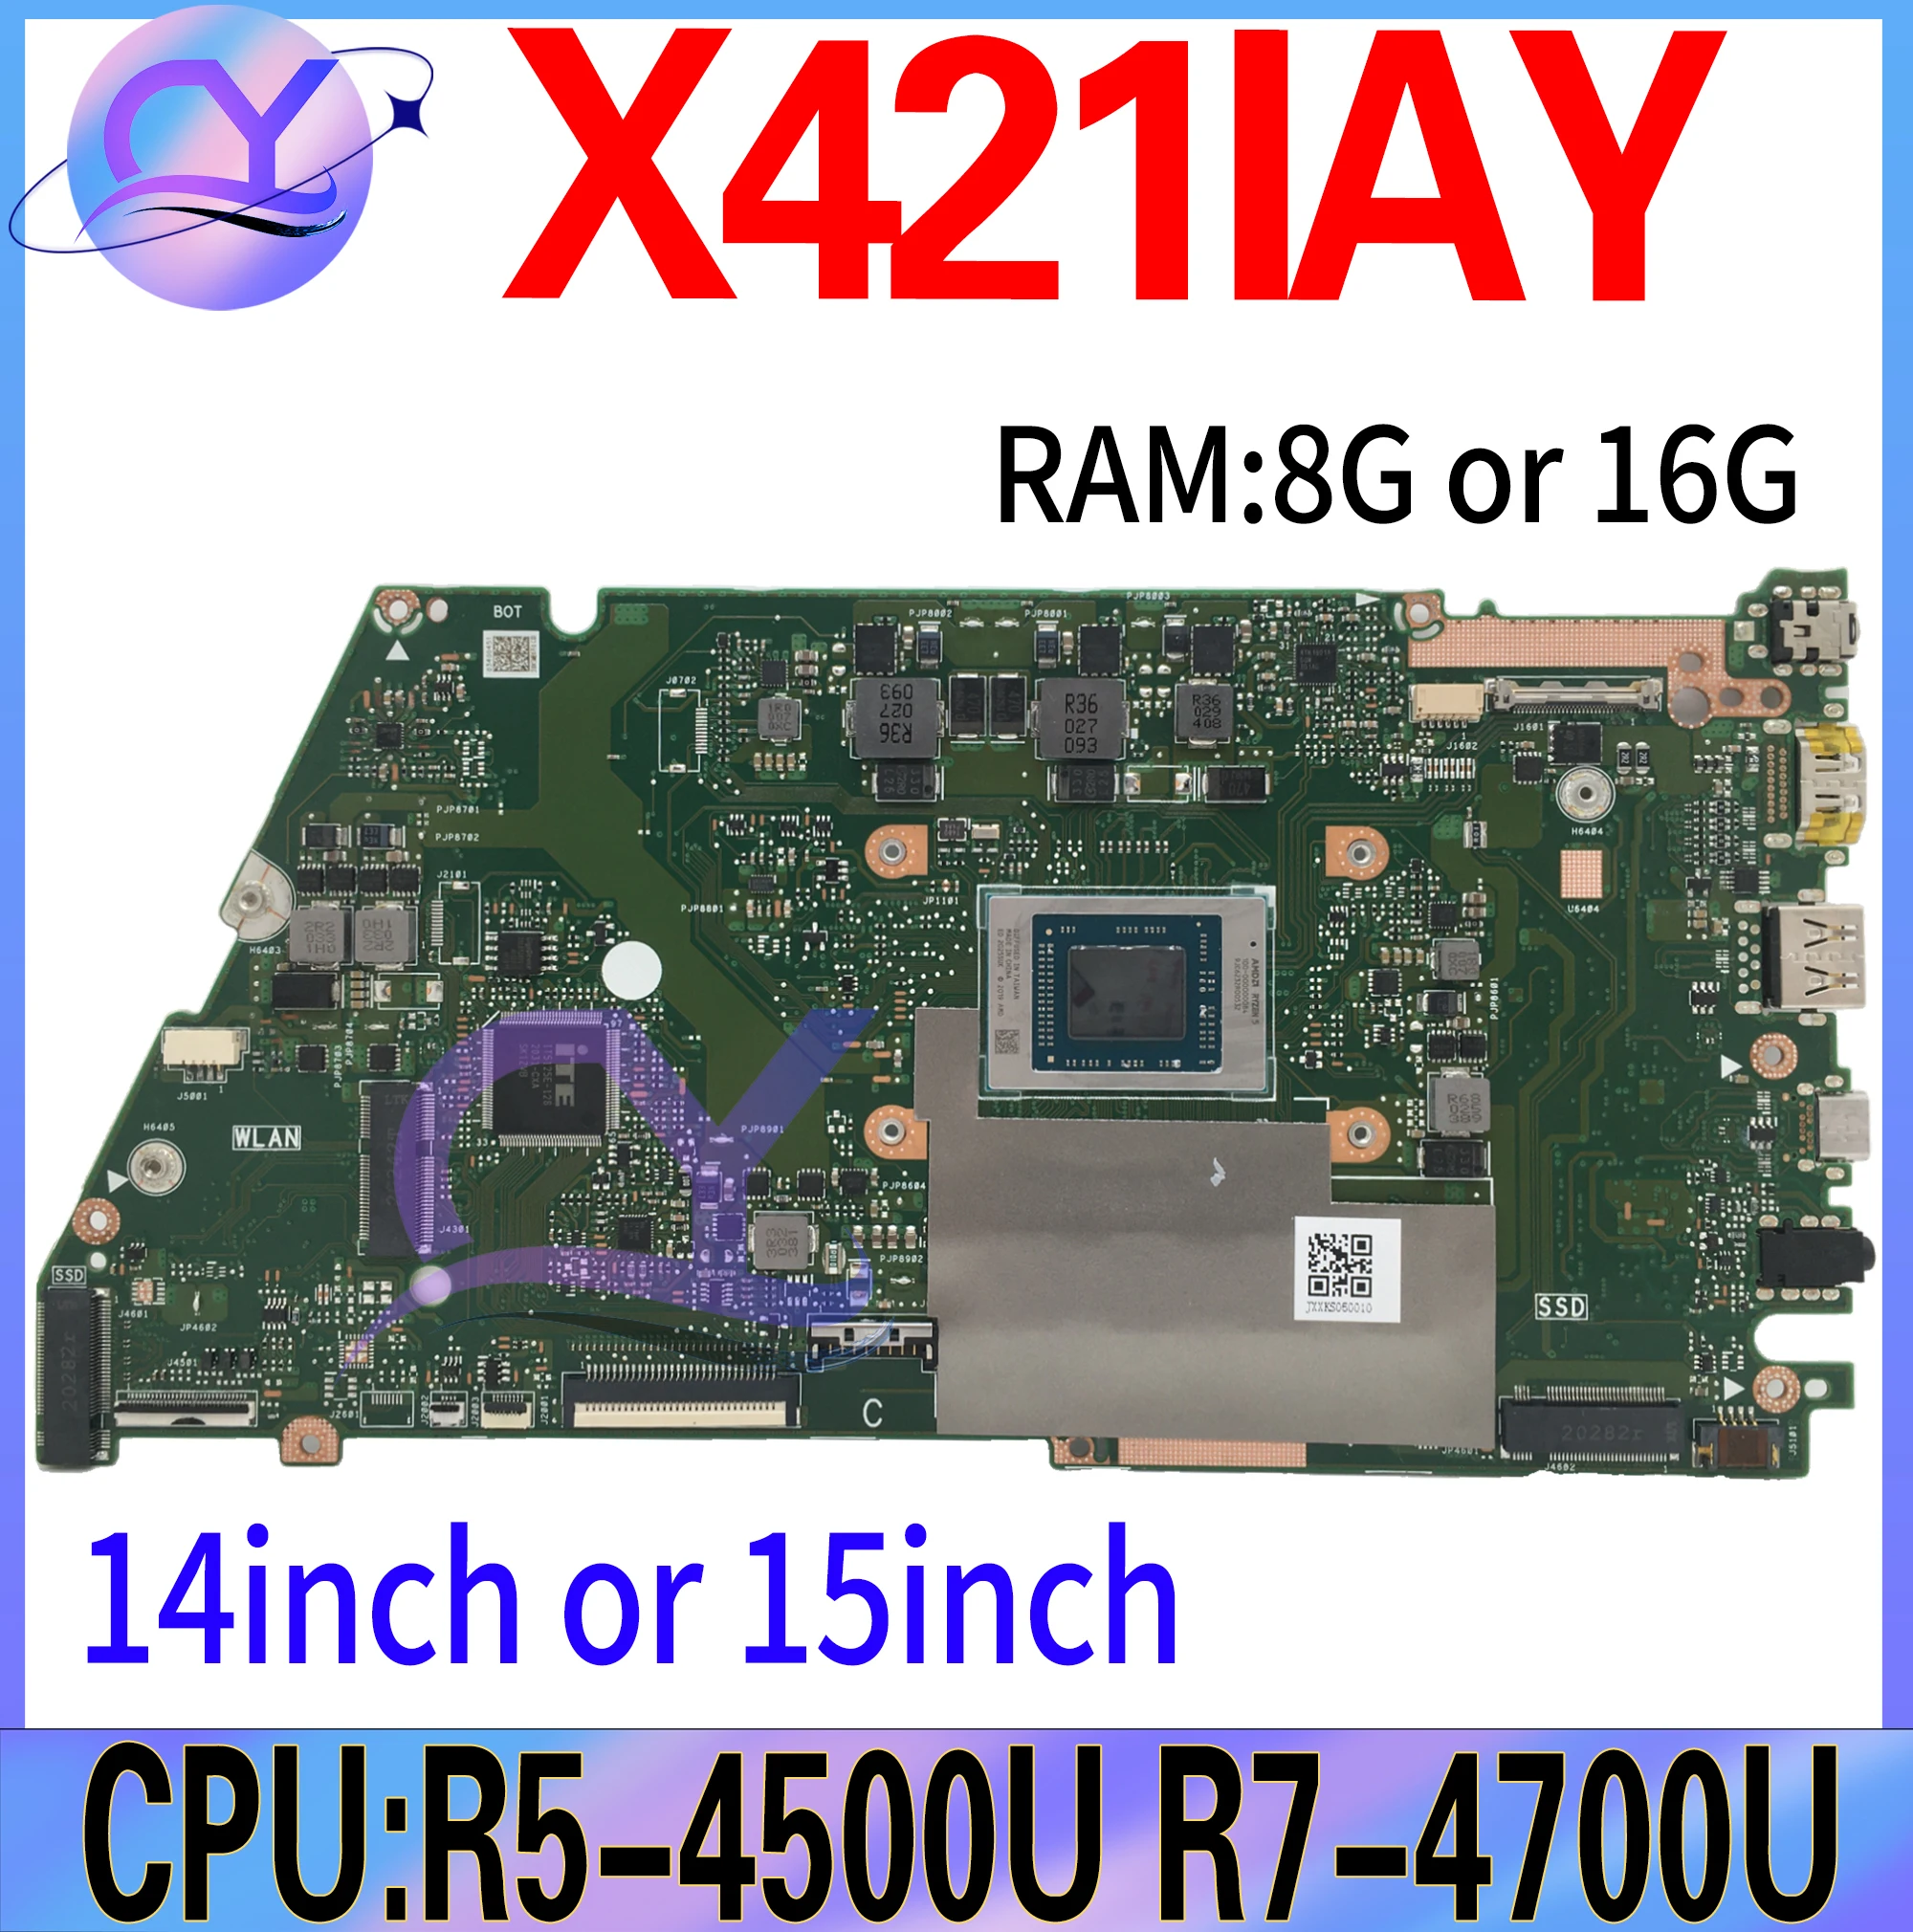 

X421IA Laptop Motherboard For ASUS VivoBook X421IAY M413IA D413IA M334IA Mainboard R5-4500U R7-4700U 8G 16G 100% Working